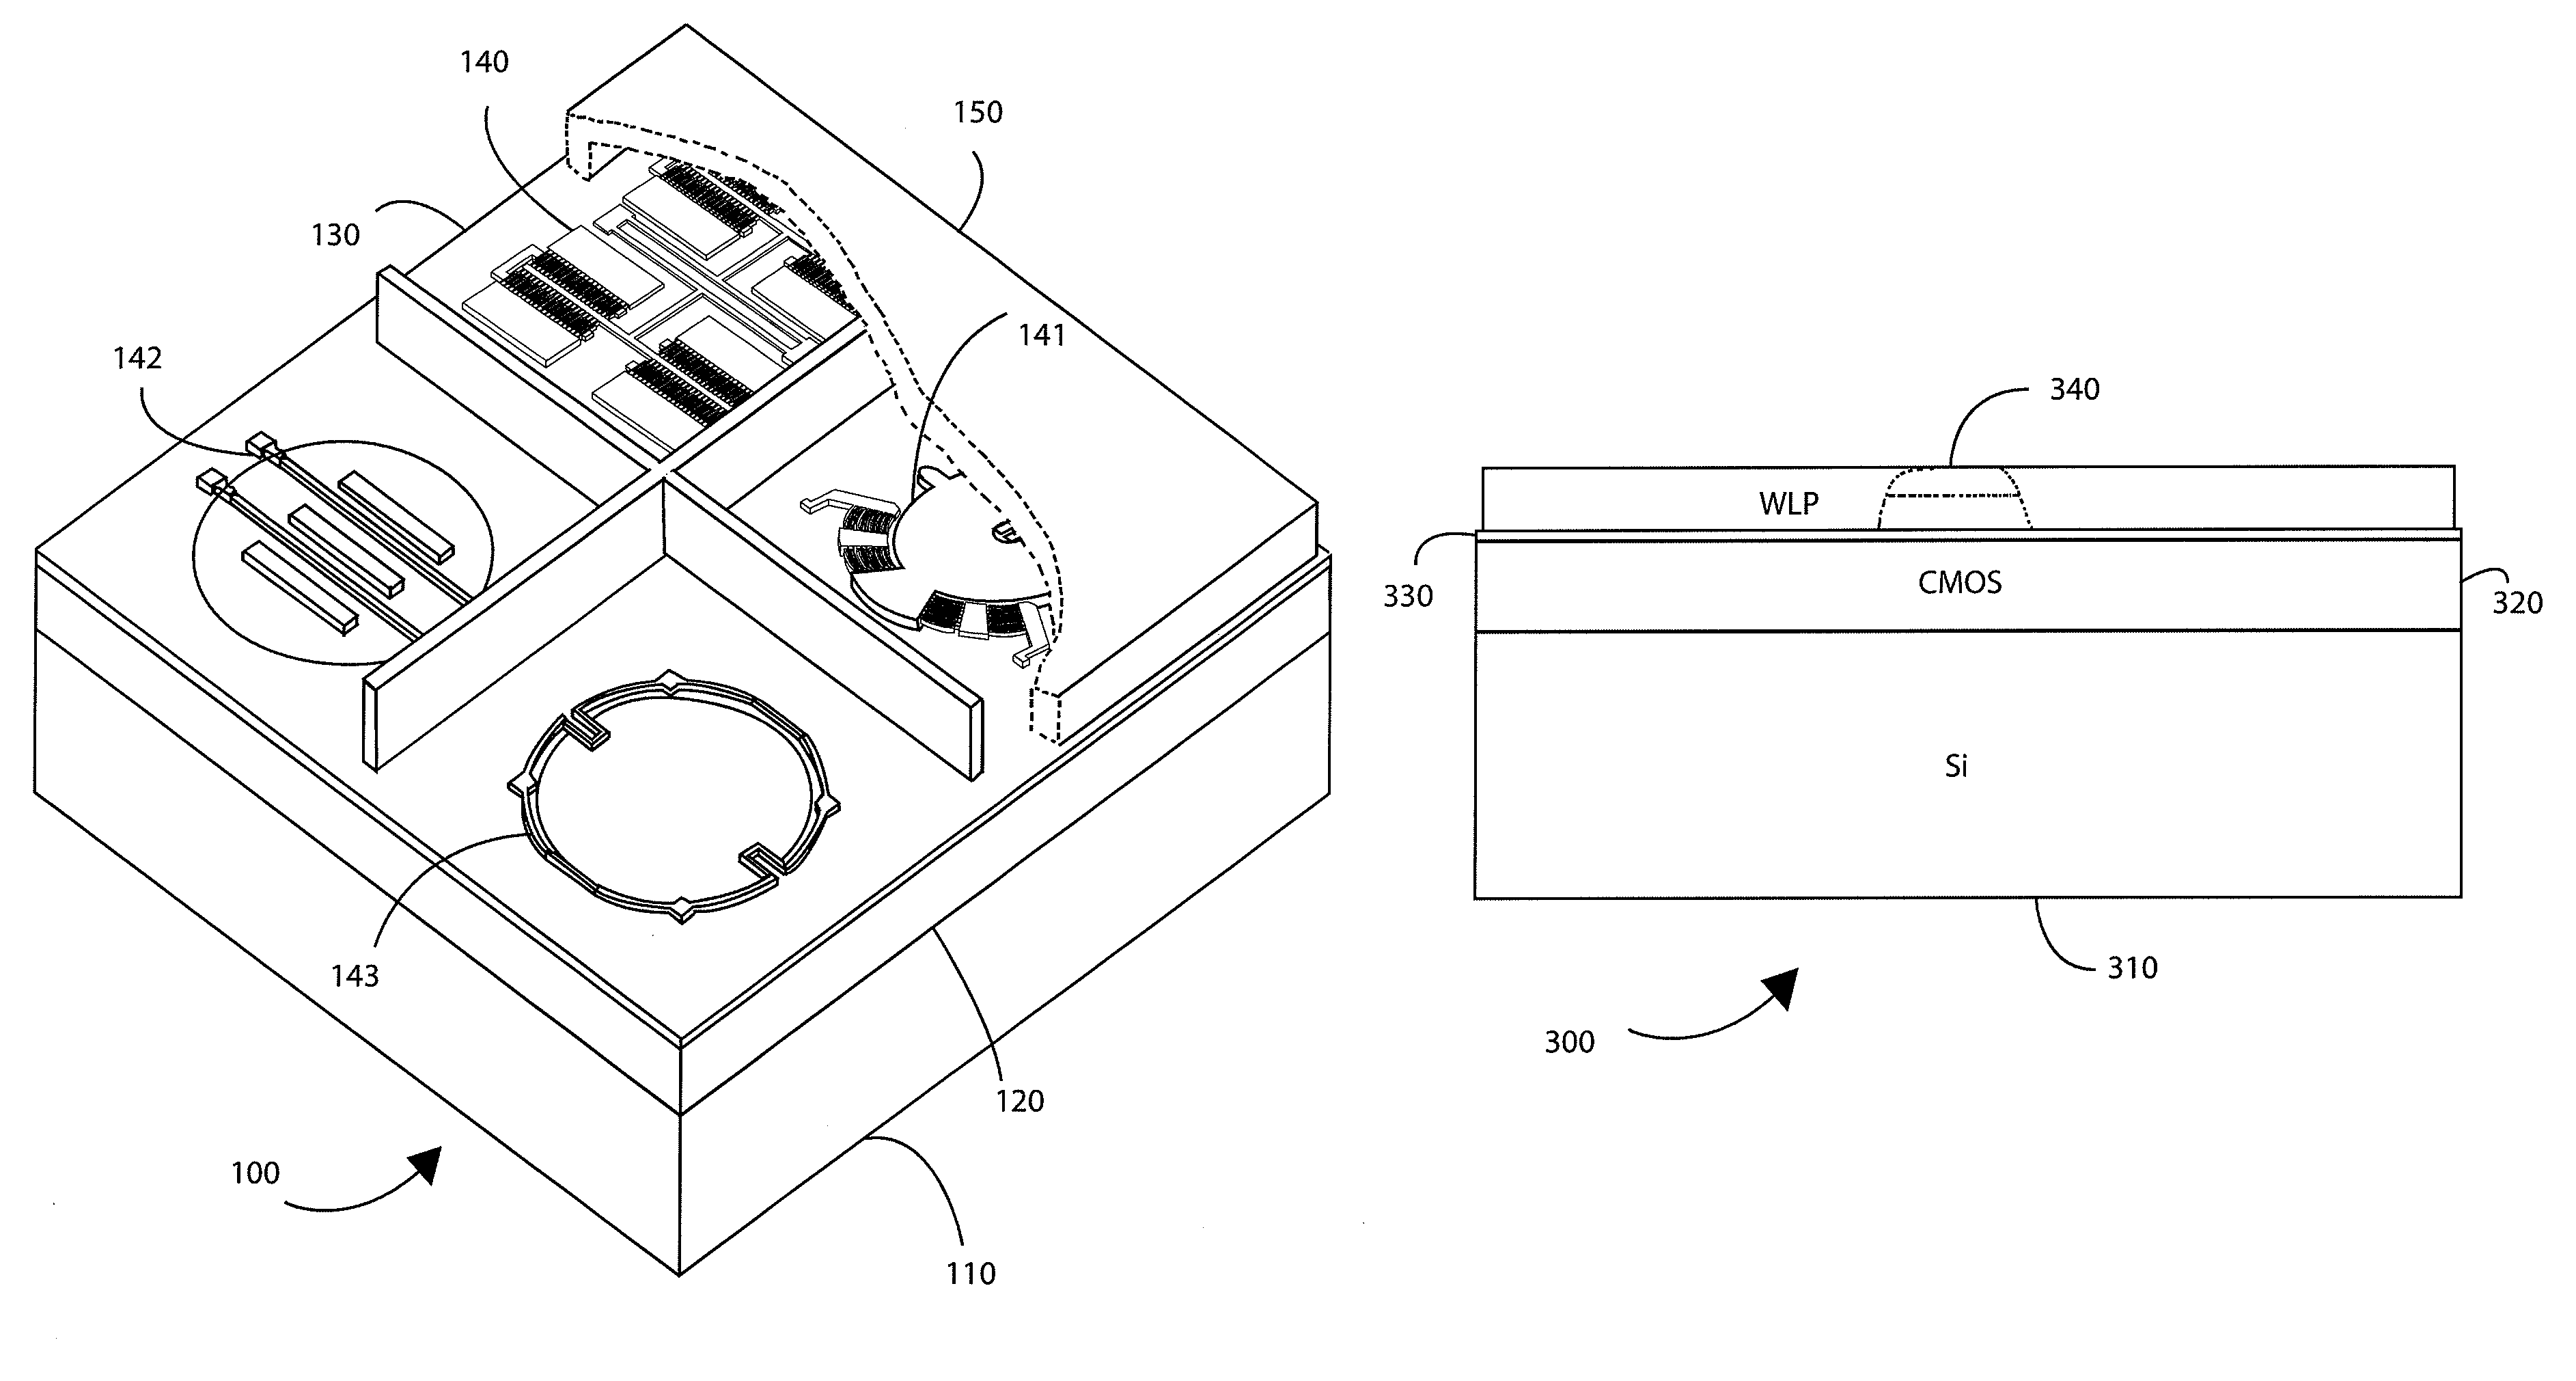 Integrated system on chip using multiple MEMS and CMOS devices